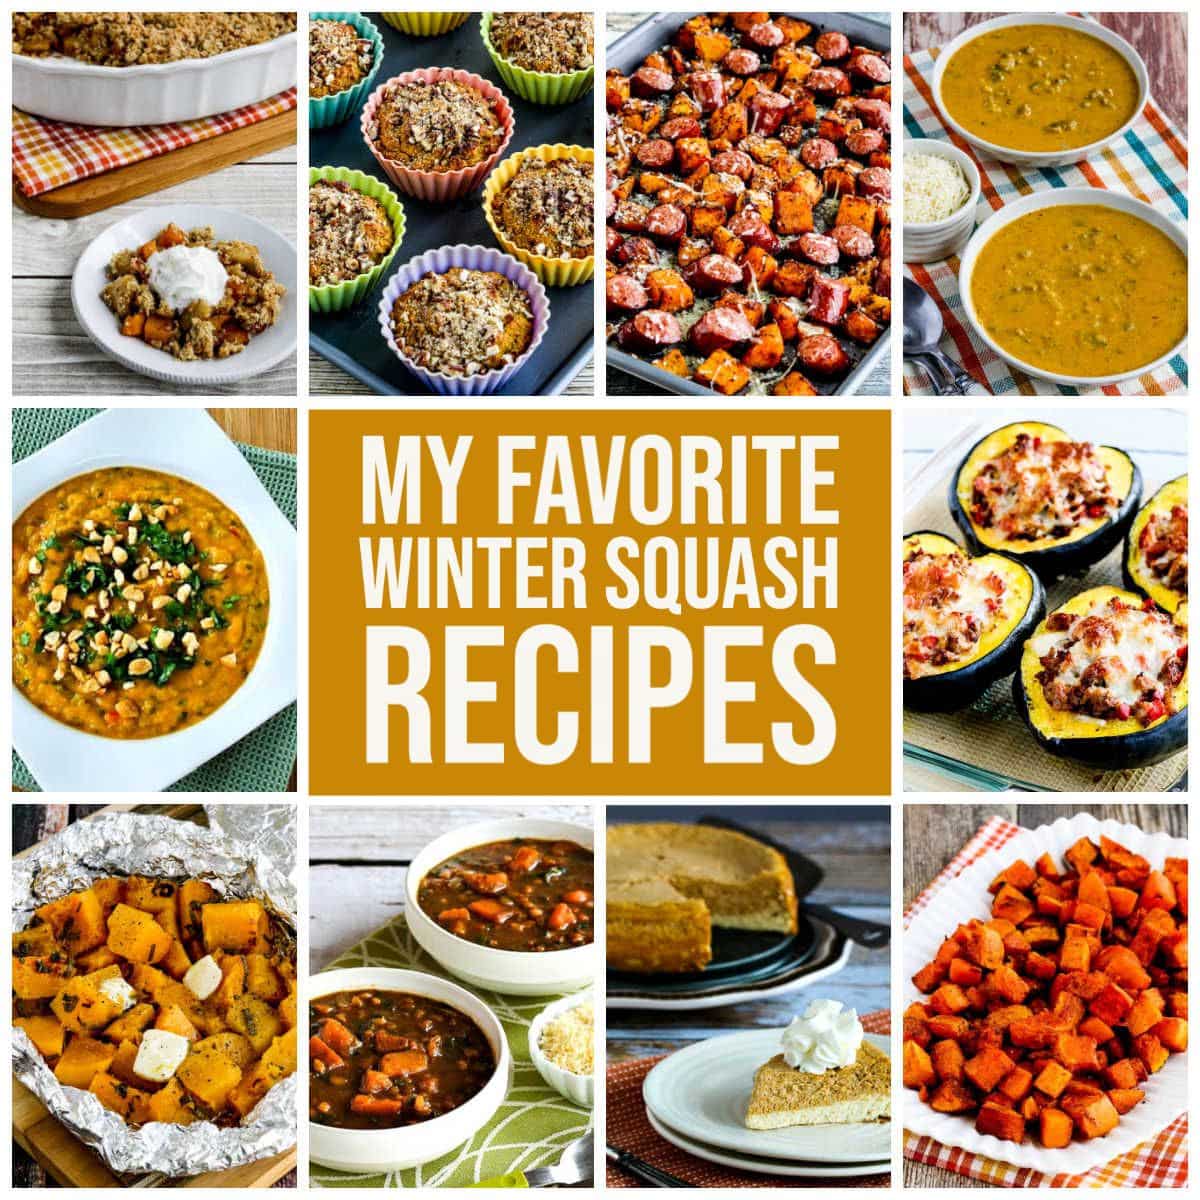 My Favorite Winter Squash Recipes collage of featured recipes with text overlay